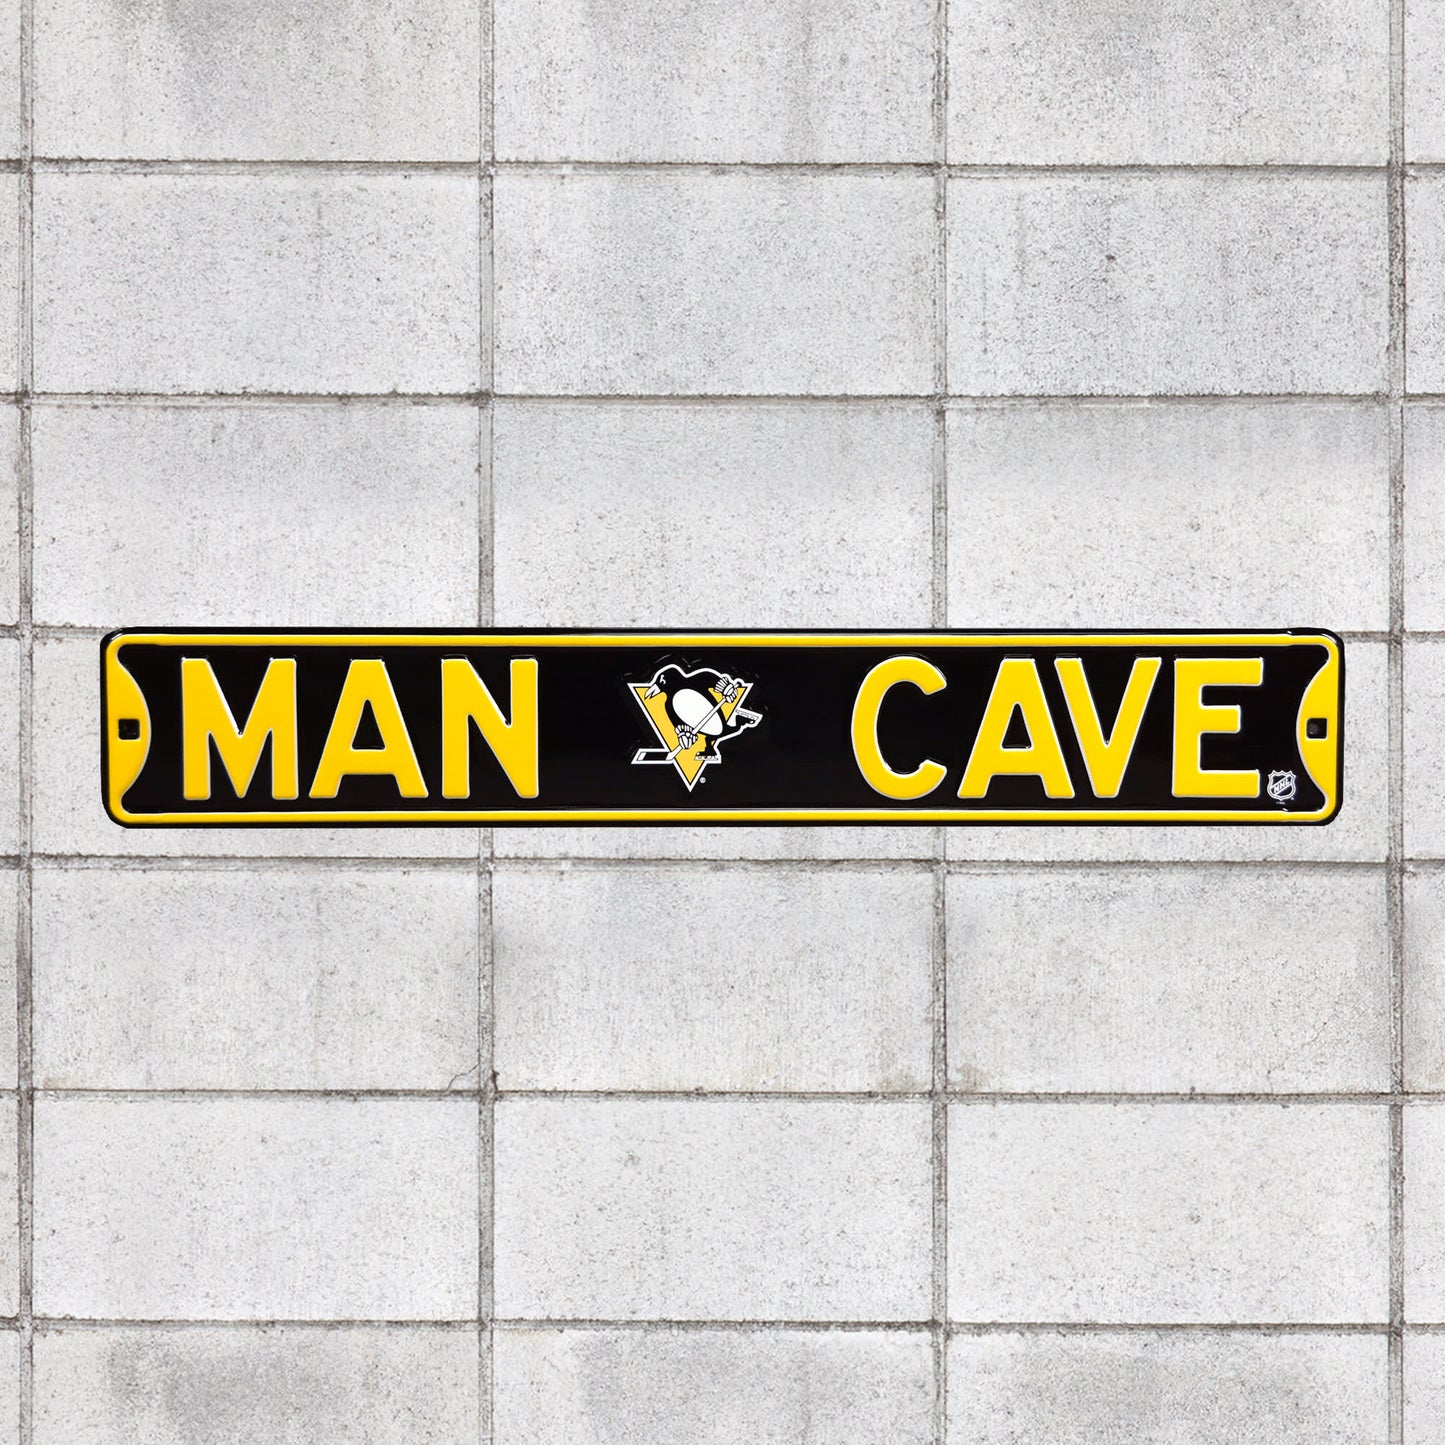 Pittsburgh Penguins: Man Cave - Officially Licensed NHL Metal Street Sign